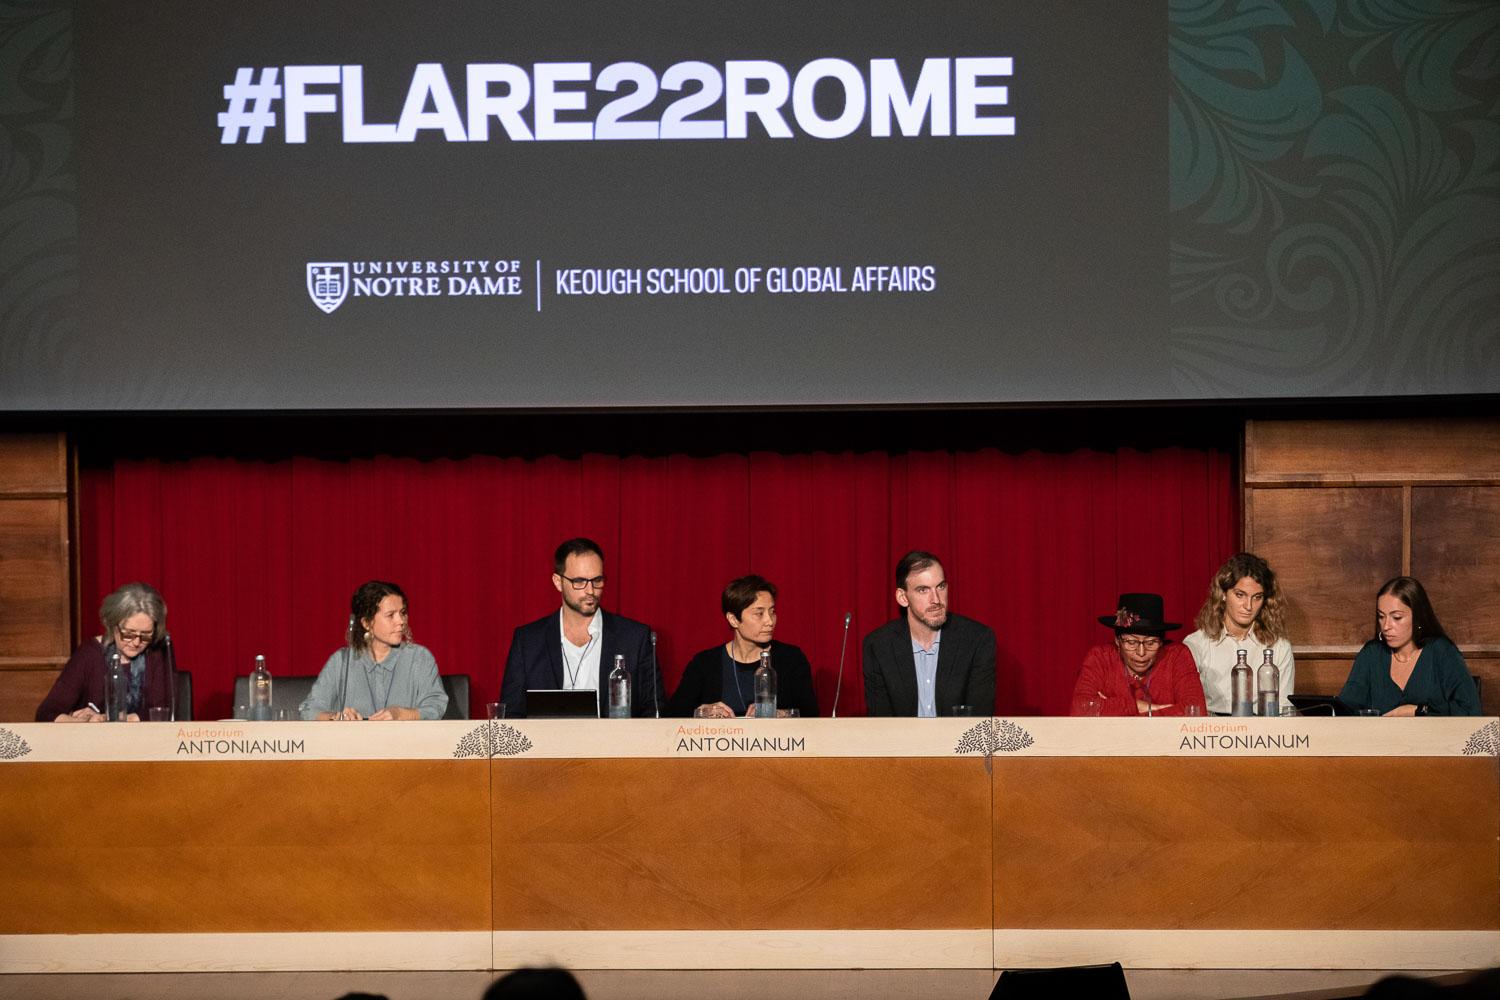 A panel of 8 speakers addresses with a background drop reading #FLARE22ROME